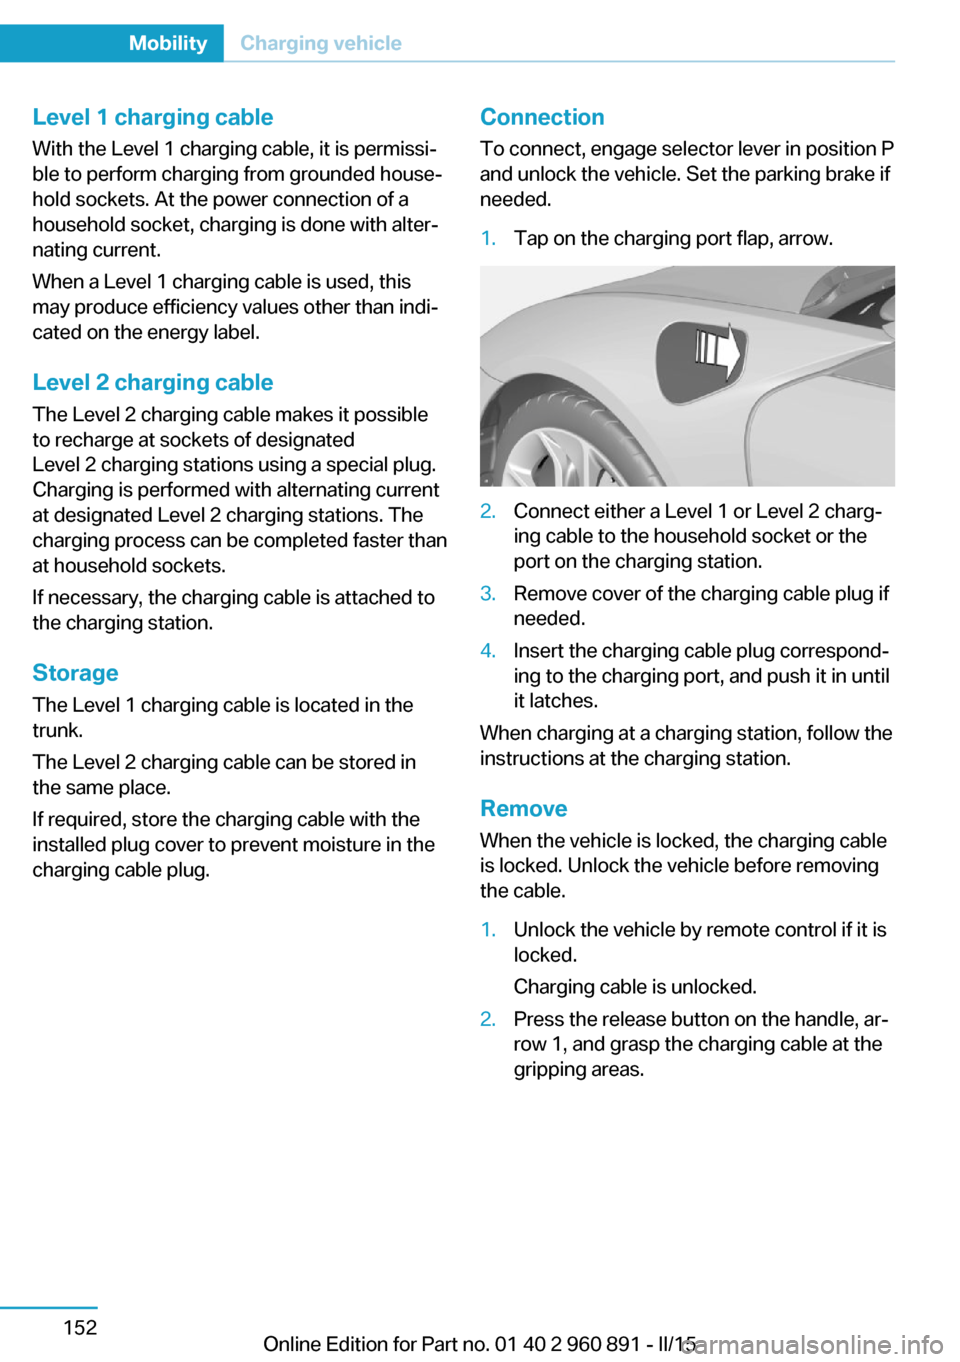 BMW I8 2015 I12 Owners Manual Level 1 charging cableWith the Level 1 charging cable, it is permissi‐
ble to perform charging from grounded house‐
hold sockets. At the power connection of a
household socket, charging is done wi